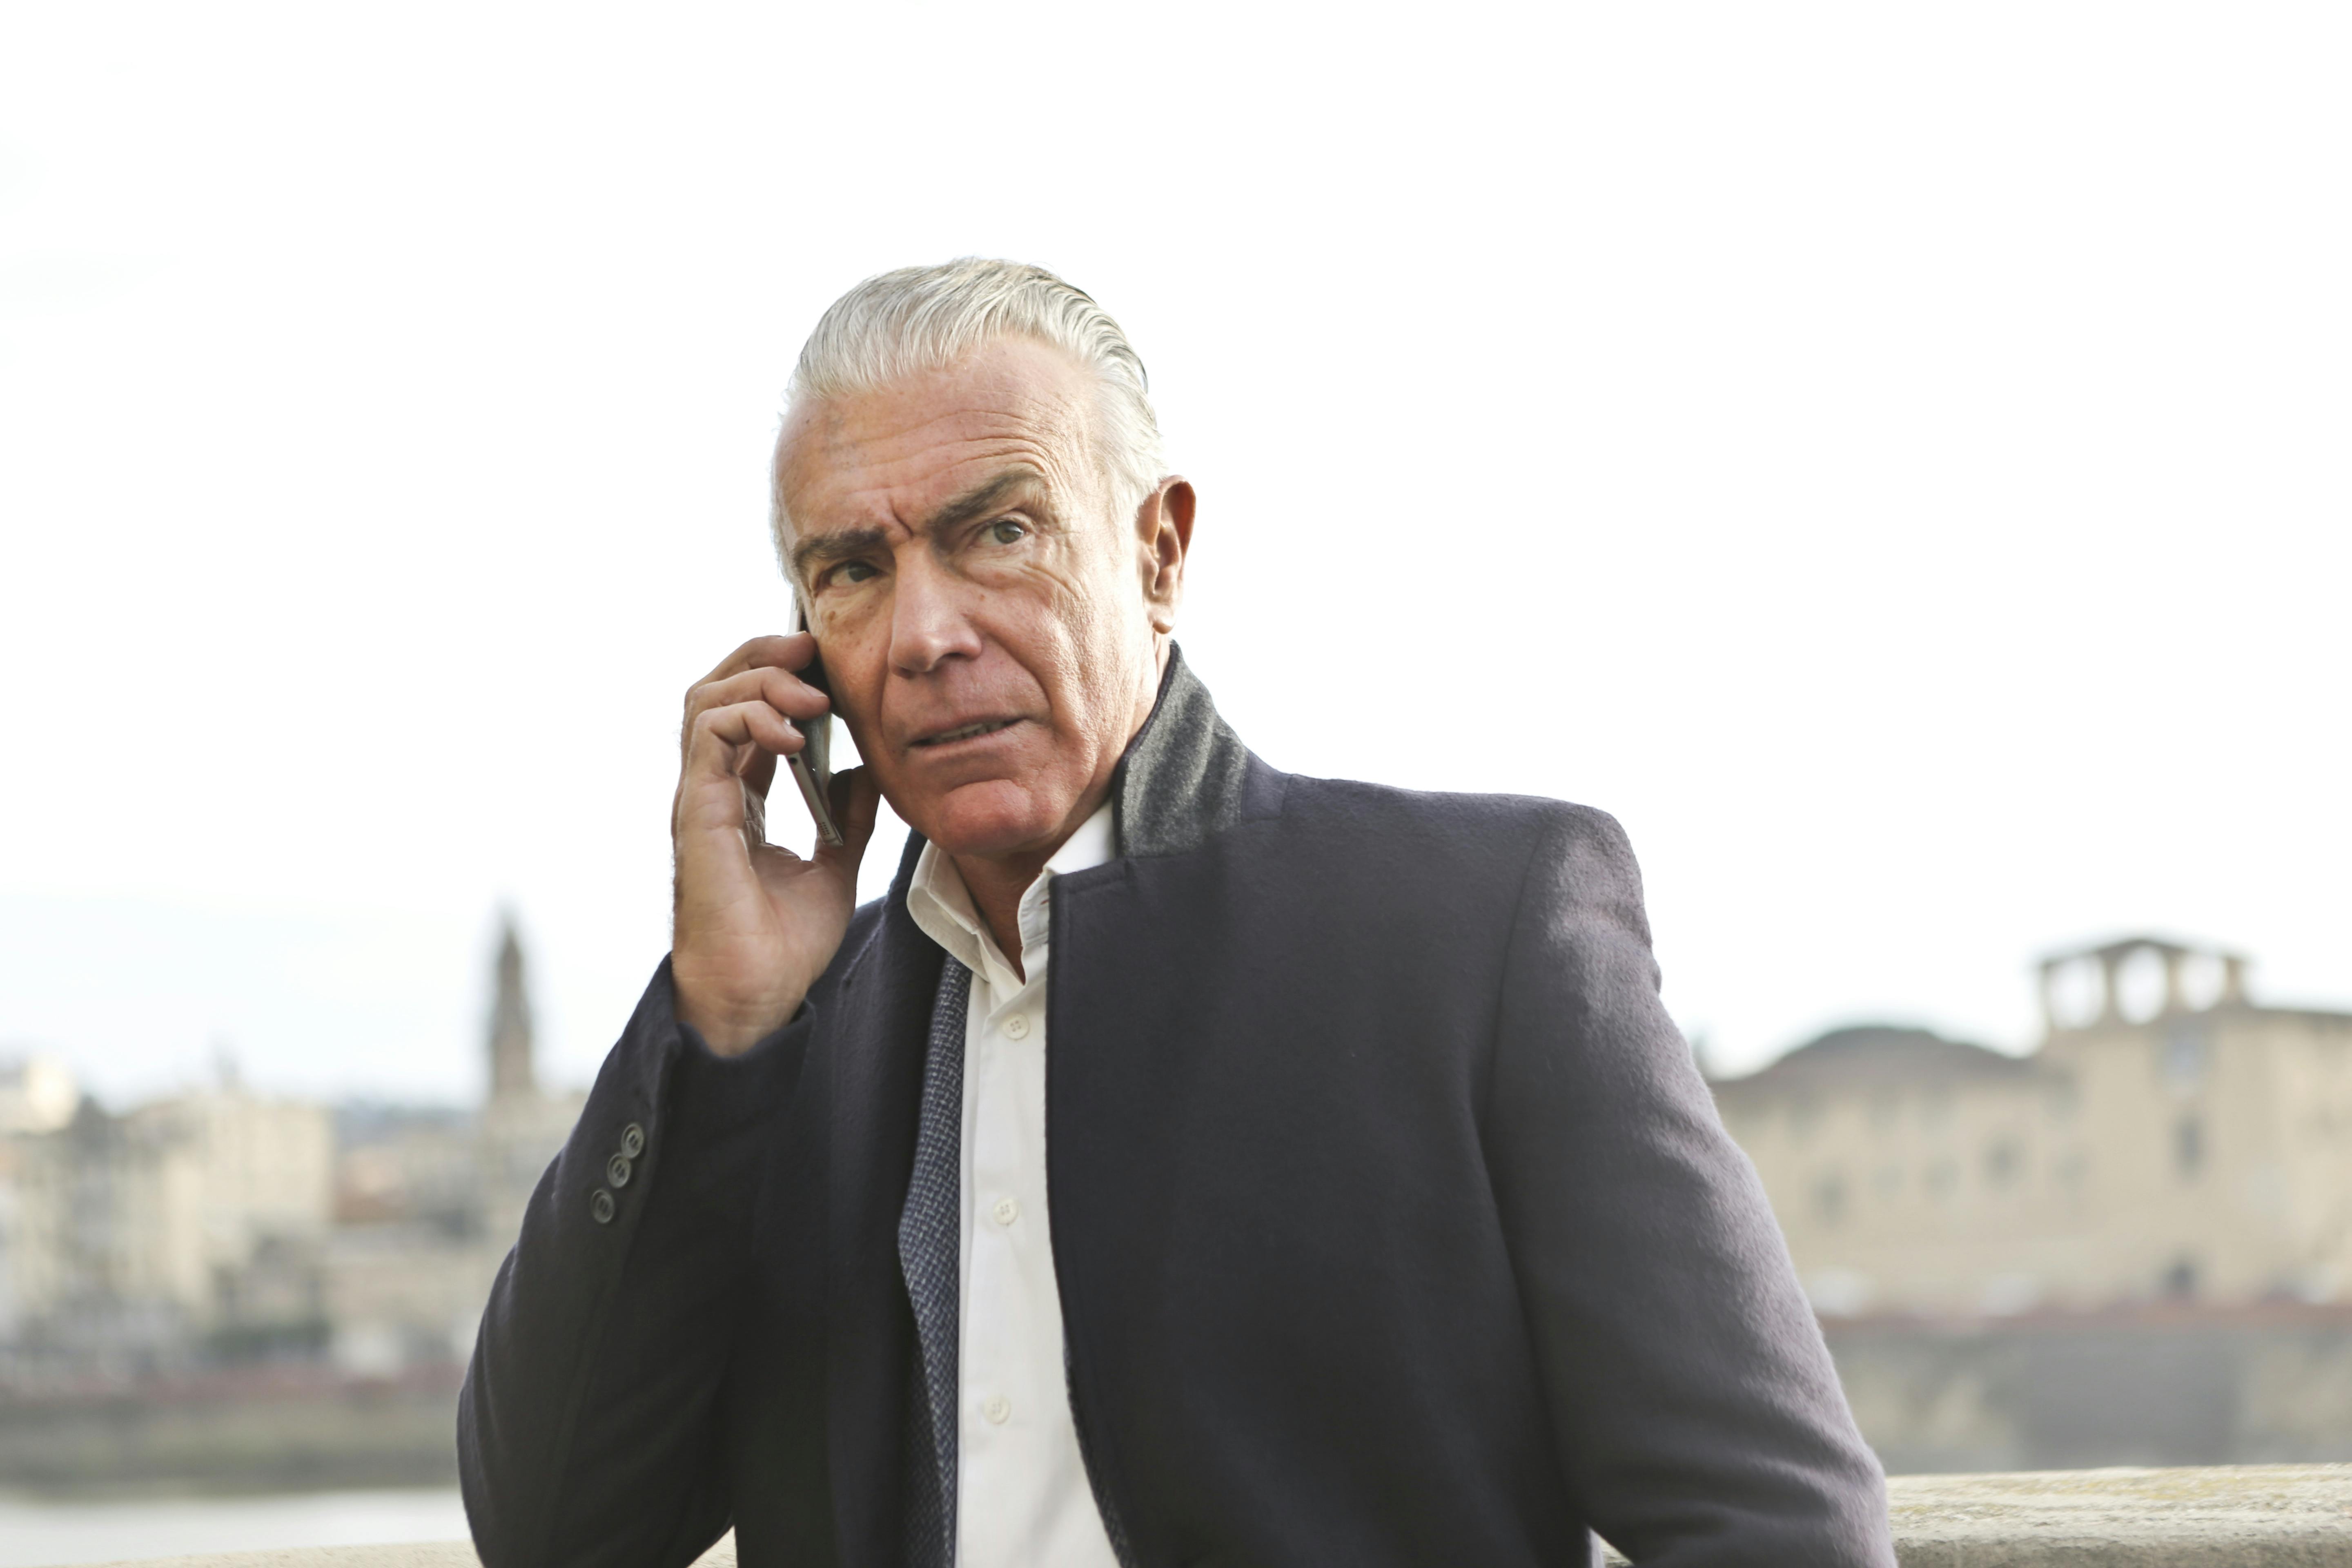 An unhappy man listening to something on his phone | Source: Pexels